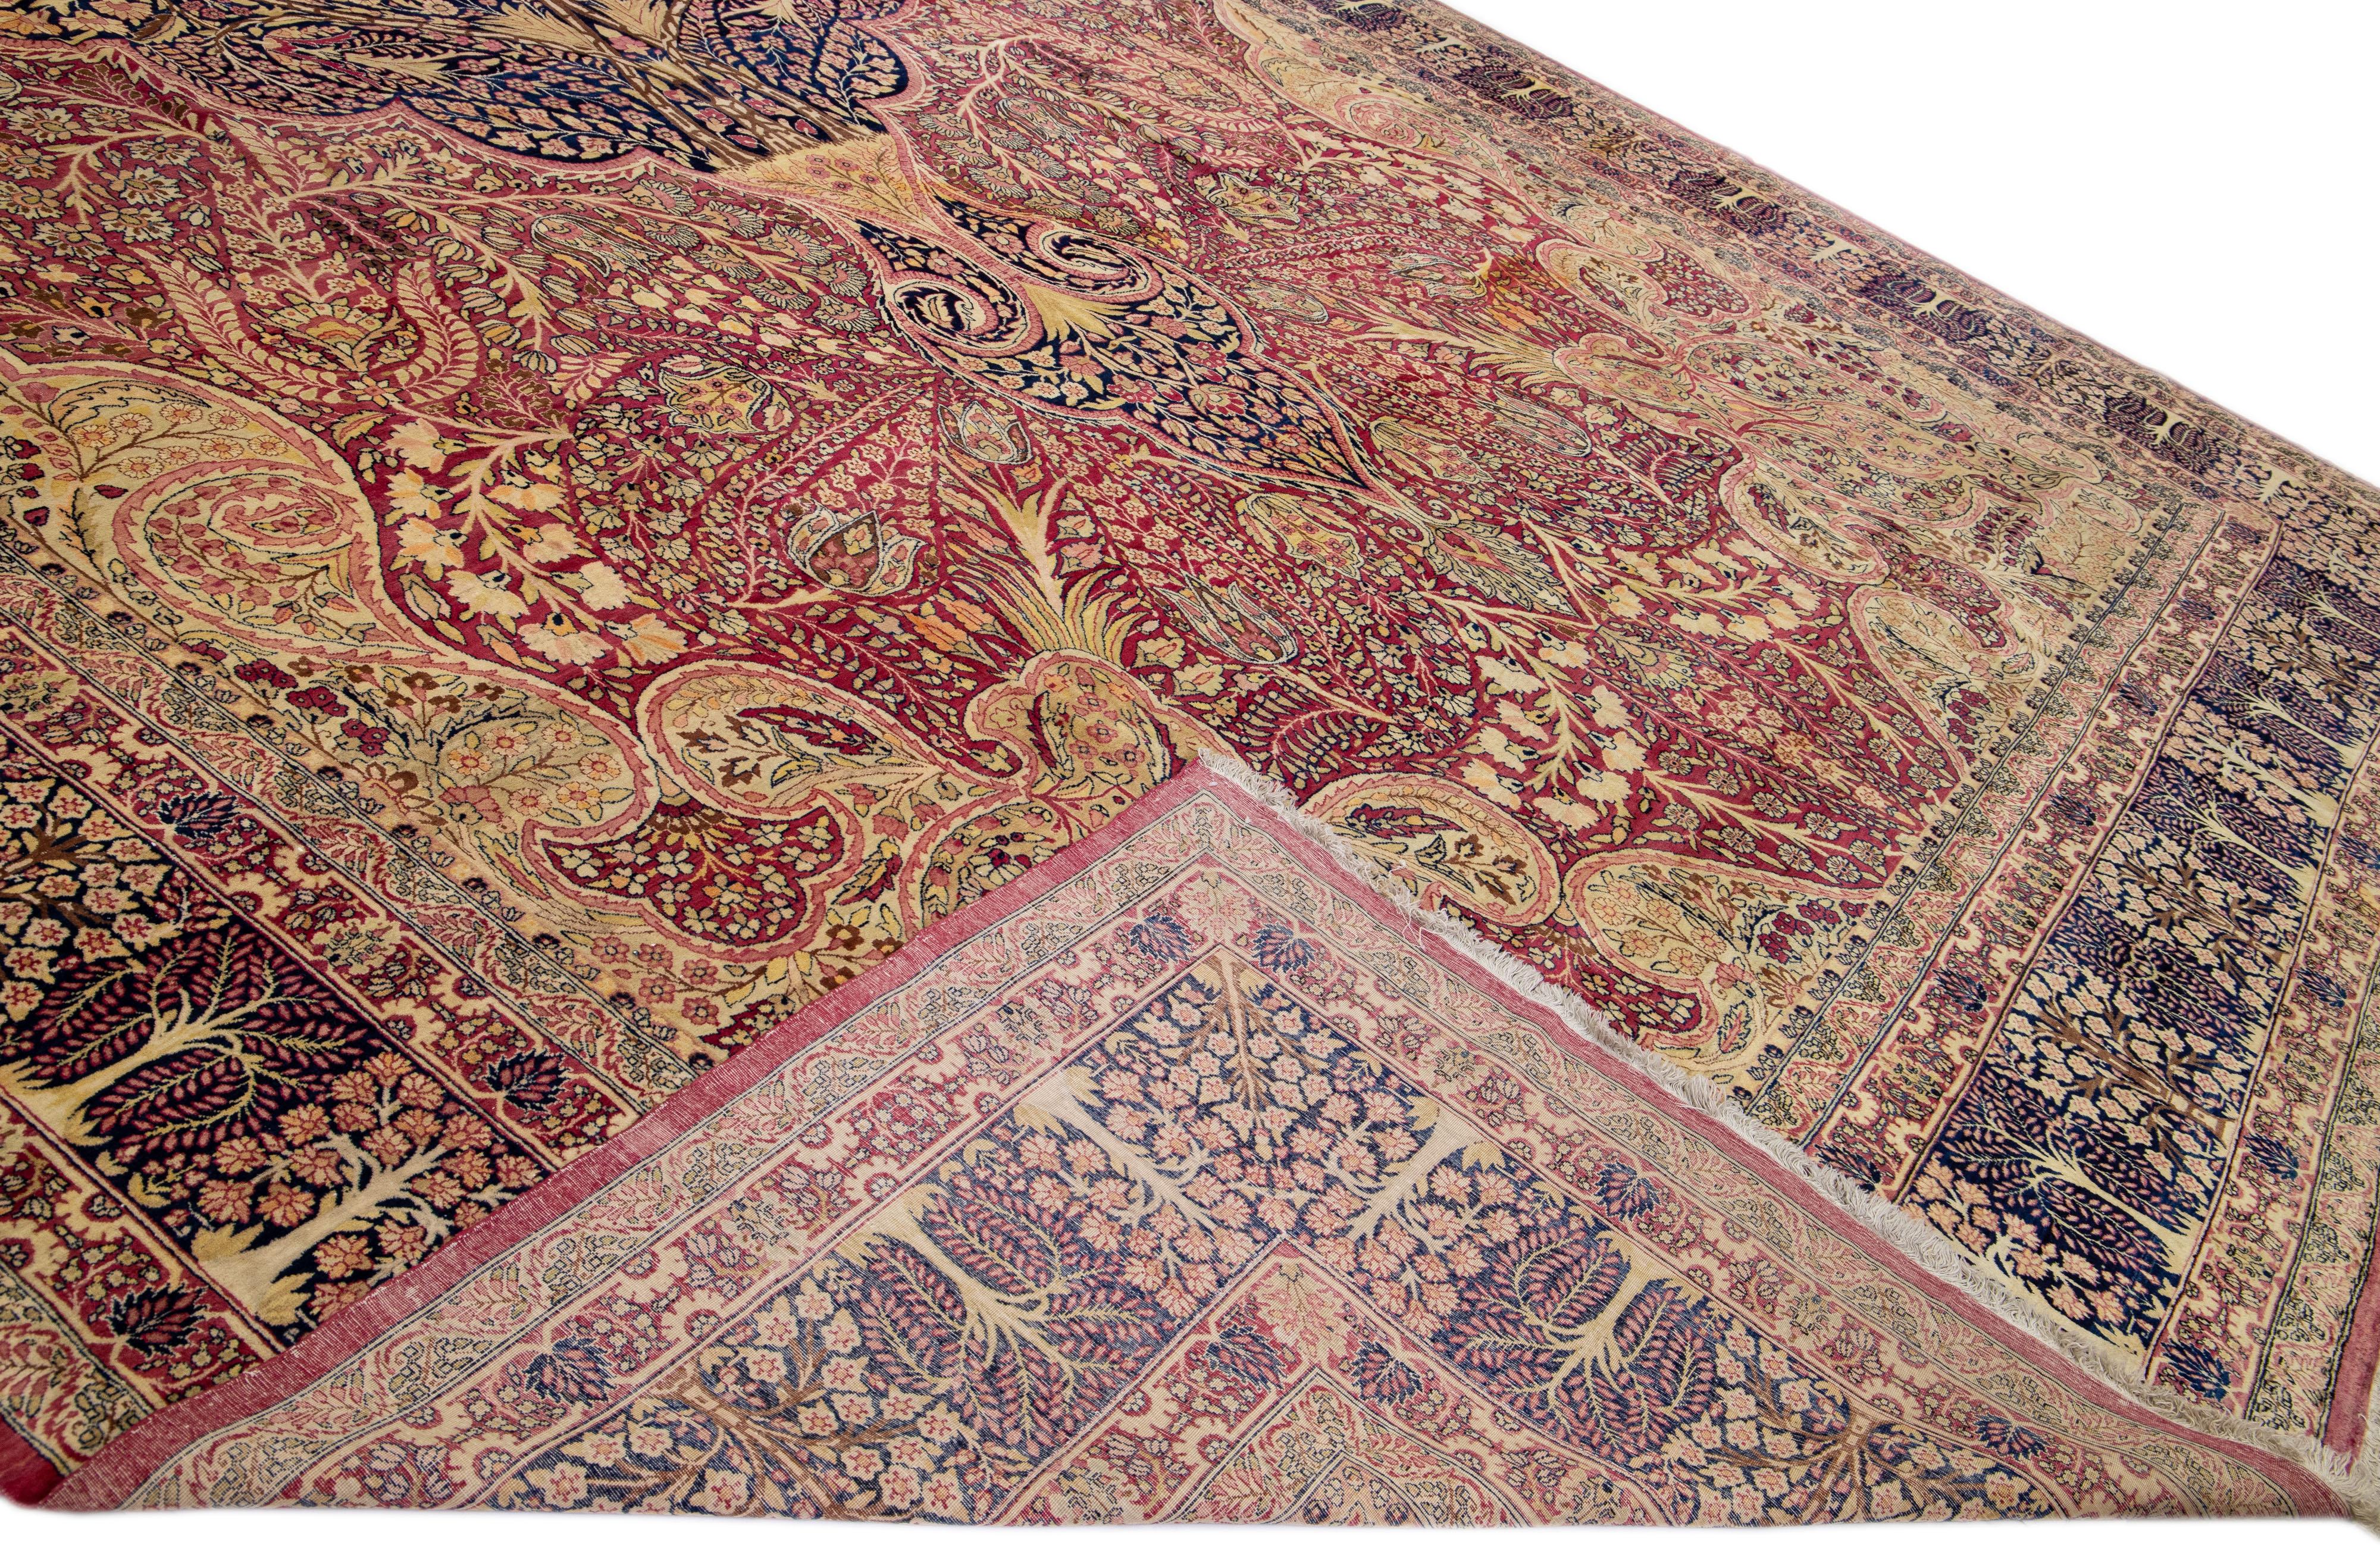 Beautiful antique Kerman hand-knotted wool rug with a beige and rose field. This Persian rug has a blue frame and multicolor accents in a gorgeous all-over rosette pattern design.

This rug measures: 14'11